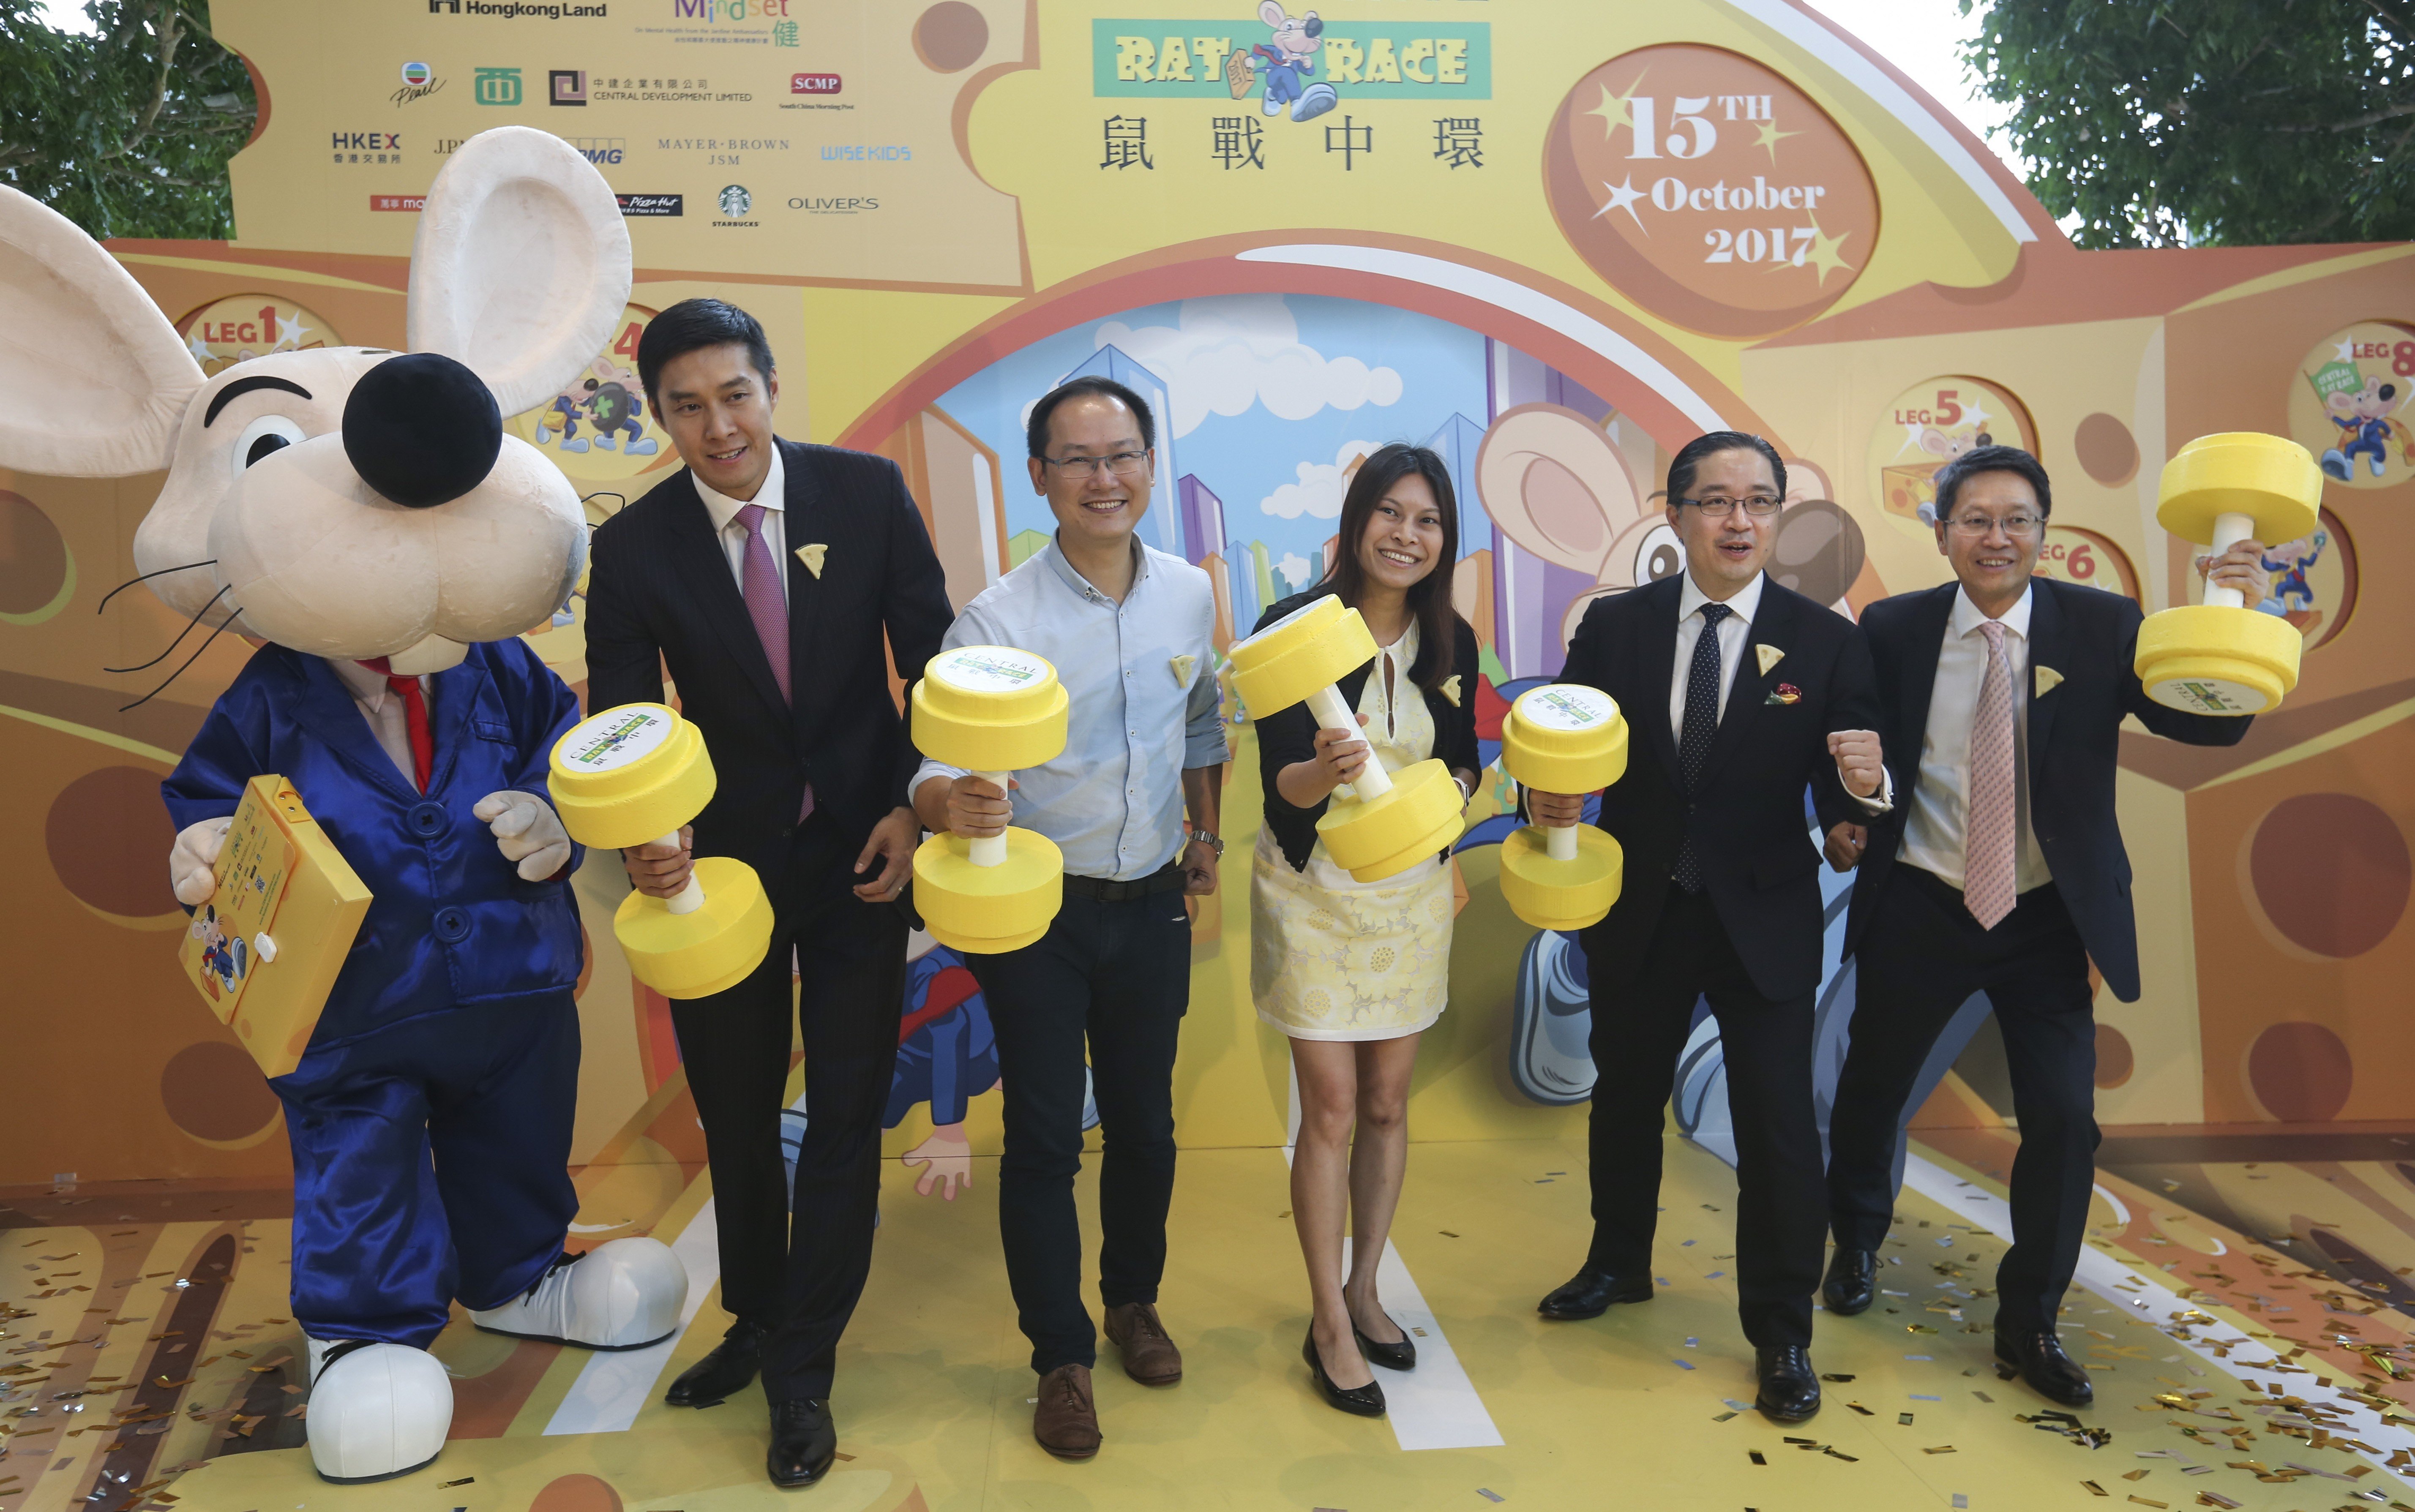 (From left): Co-chairman of the Central Rat Race Committee, Ronald Ho; Vice-chairman of the Central Western District, Chan Hok-fung; Executive director of Mindset, Esther Wong; Executive director of Hongkong Land, Raymond Chow Ming-joe; and Co-chairman of the Central Rat Race Committee, Daniel Kwok at a press conference for this year’s race. Photo: Xiaomei Chen